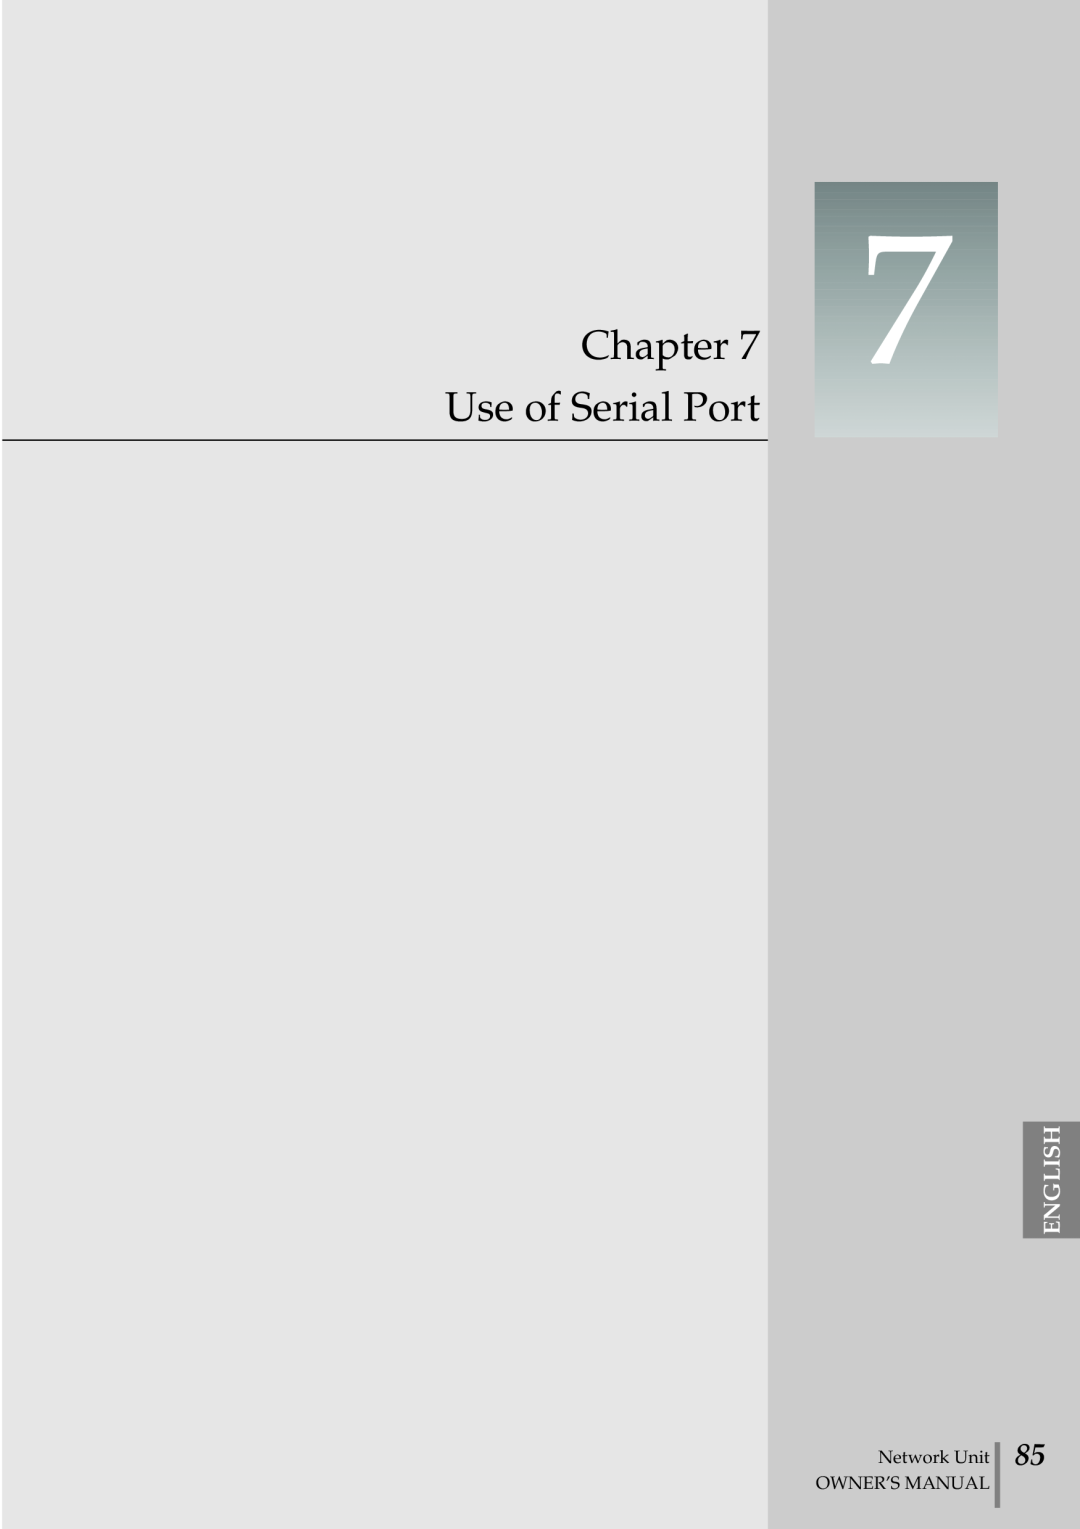 Eiki PjNET-20 owner manual Use of Serial Port, Chapter, English, Network Unit OWNER’S MANUAL 